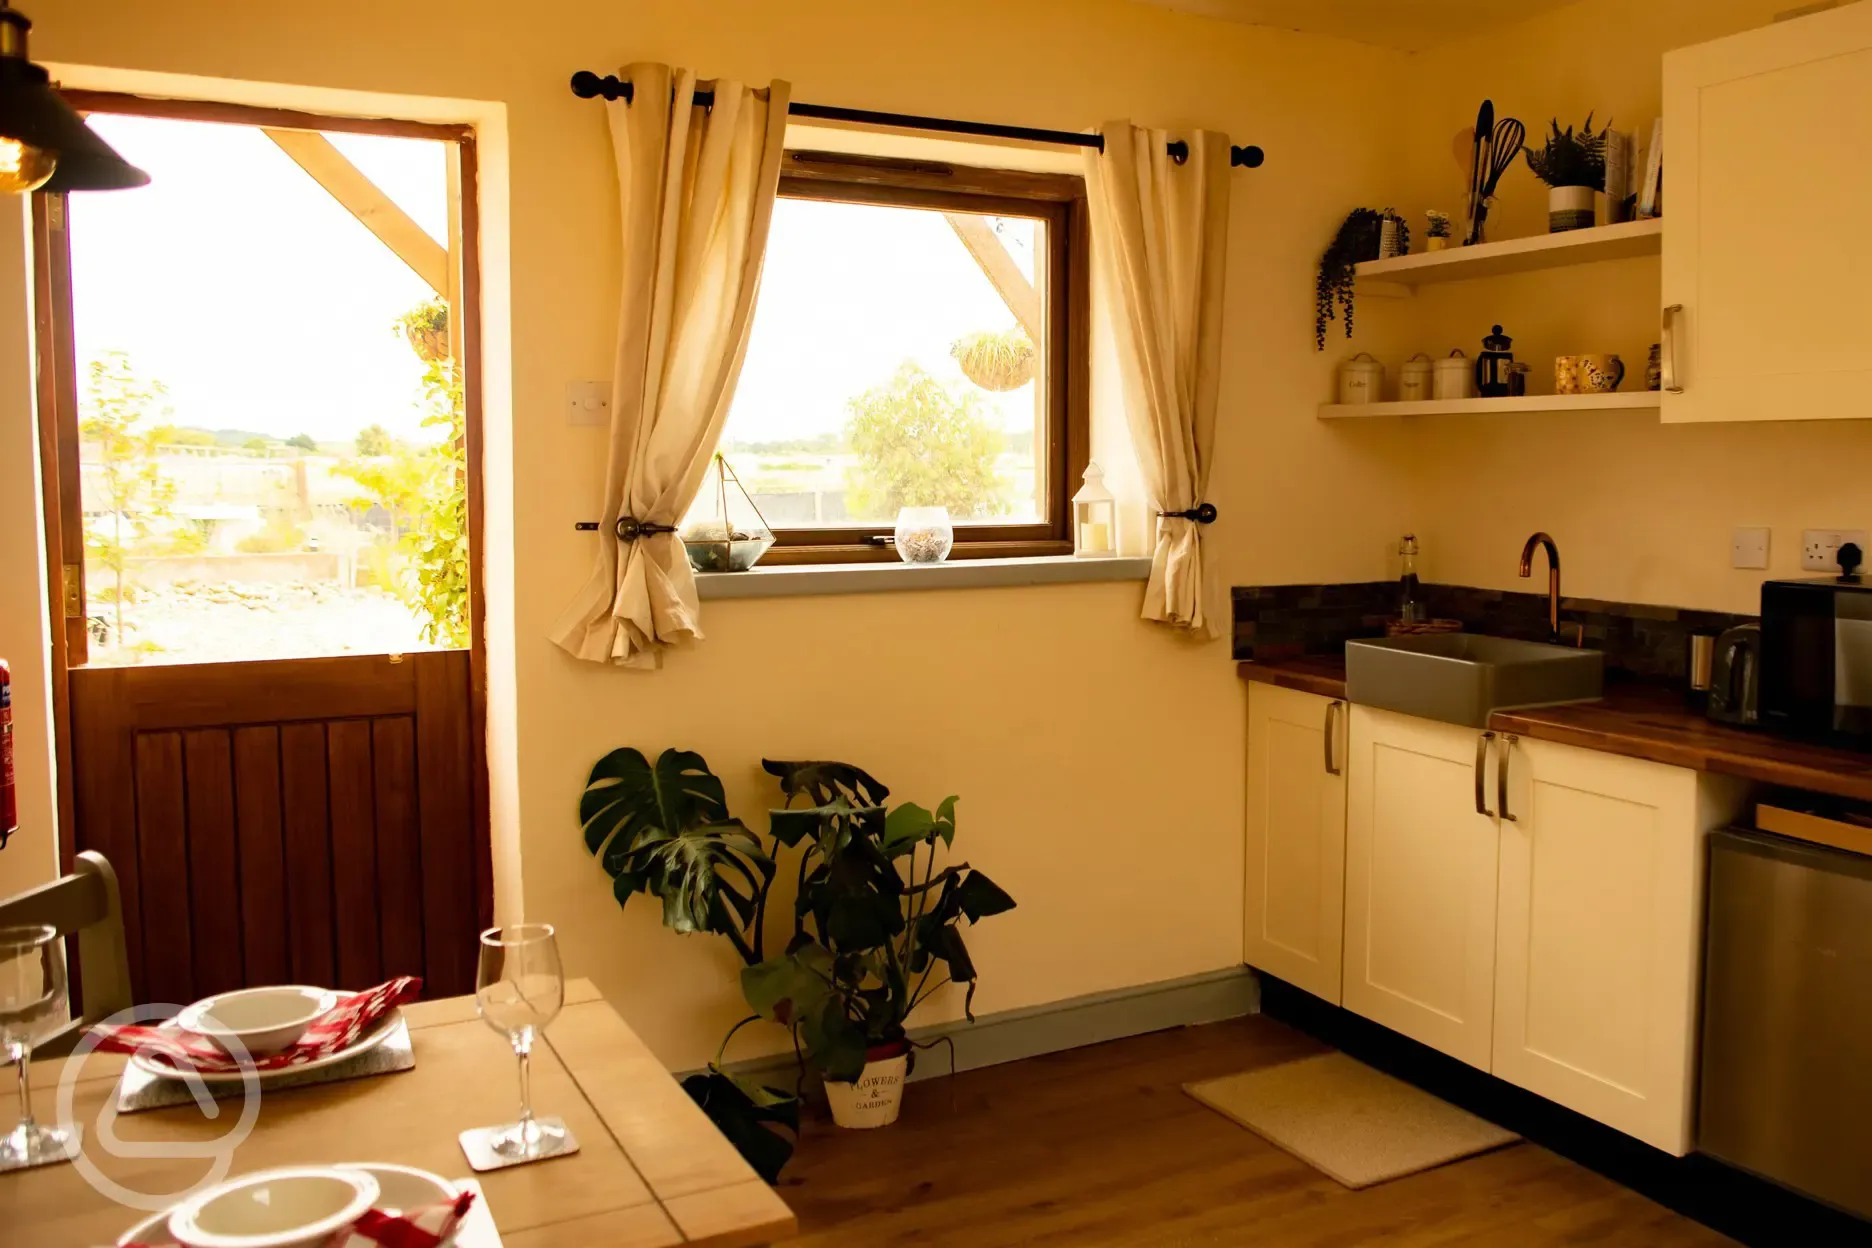 Kitchen area in Sandy 1of our self-catering Stables chalets